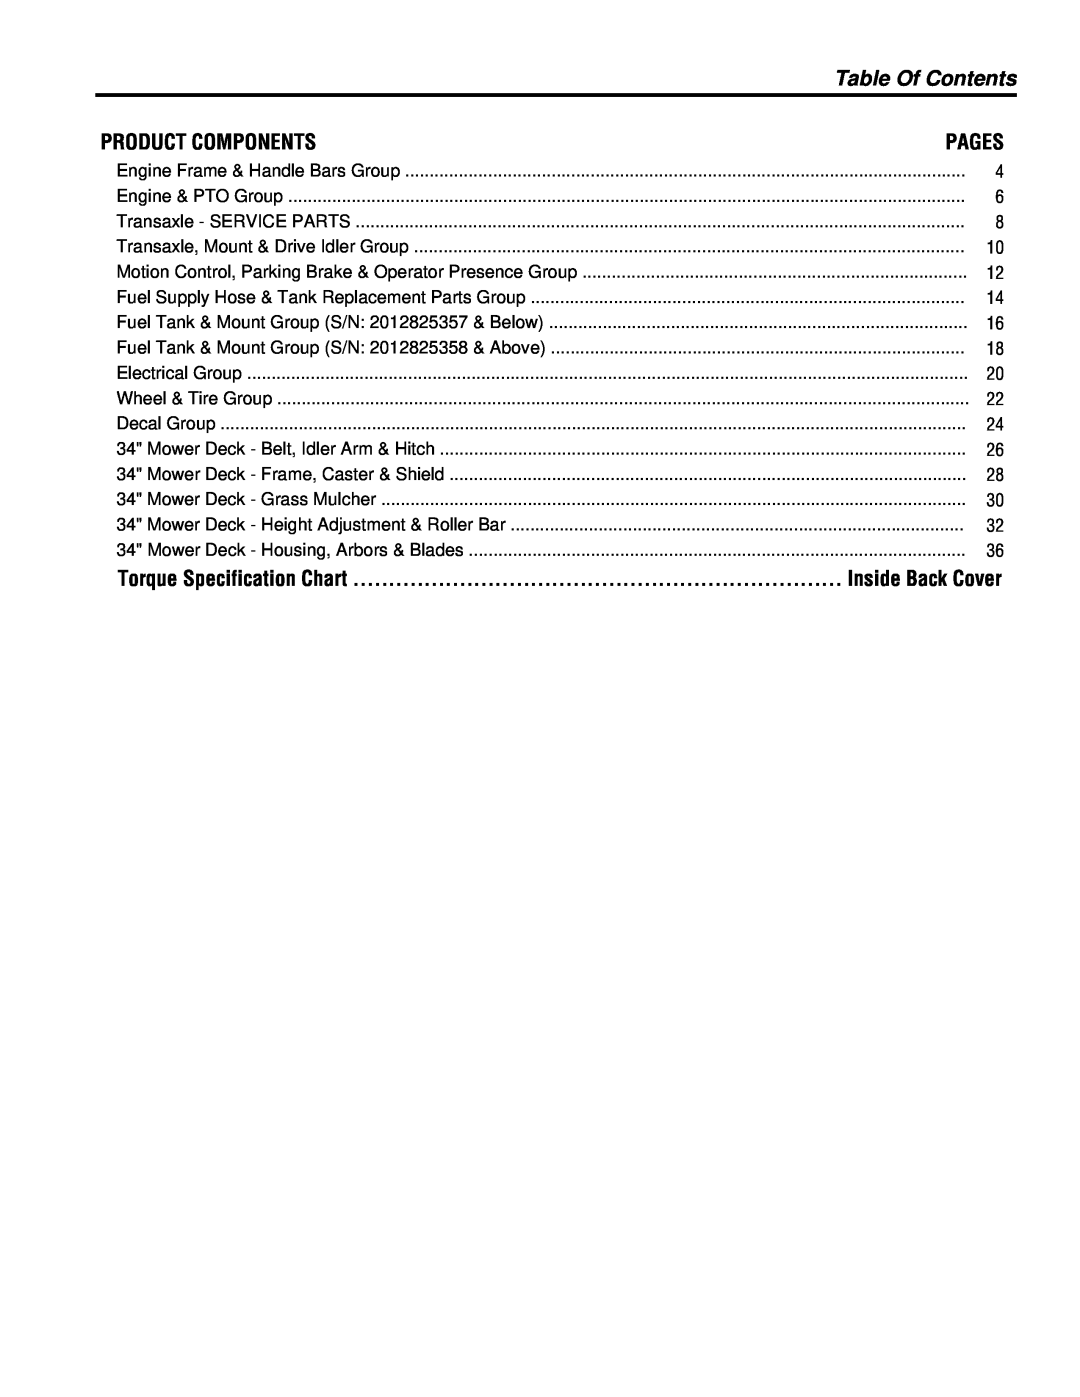 Simplicity Pacer manual Table Of Contents, Product Components, Pages, Torque Specification Chart, Inside Back Cover 